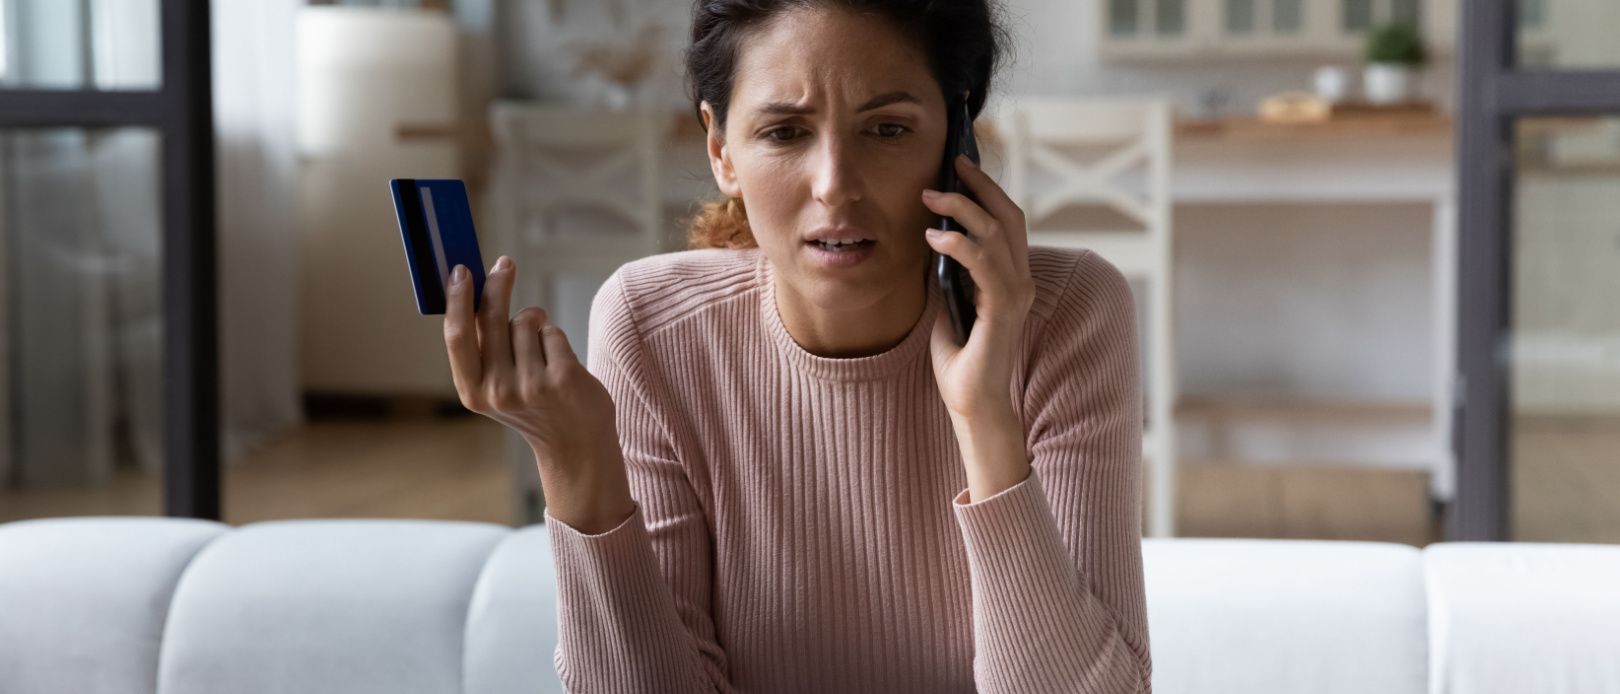 Woman looking concerned over unsecured debt